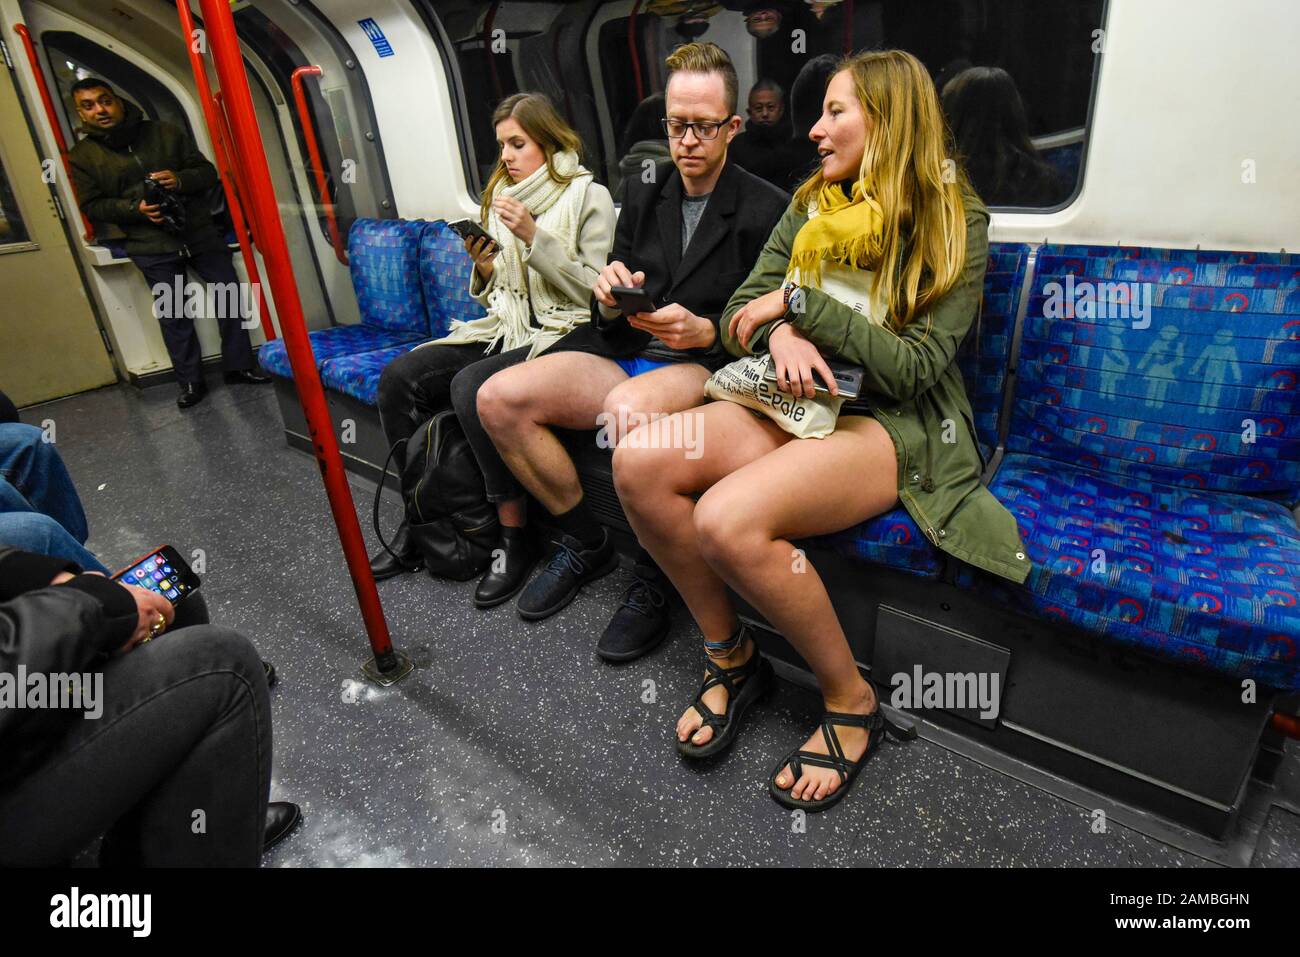 No Trousers On The Tube Day 2020